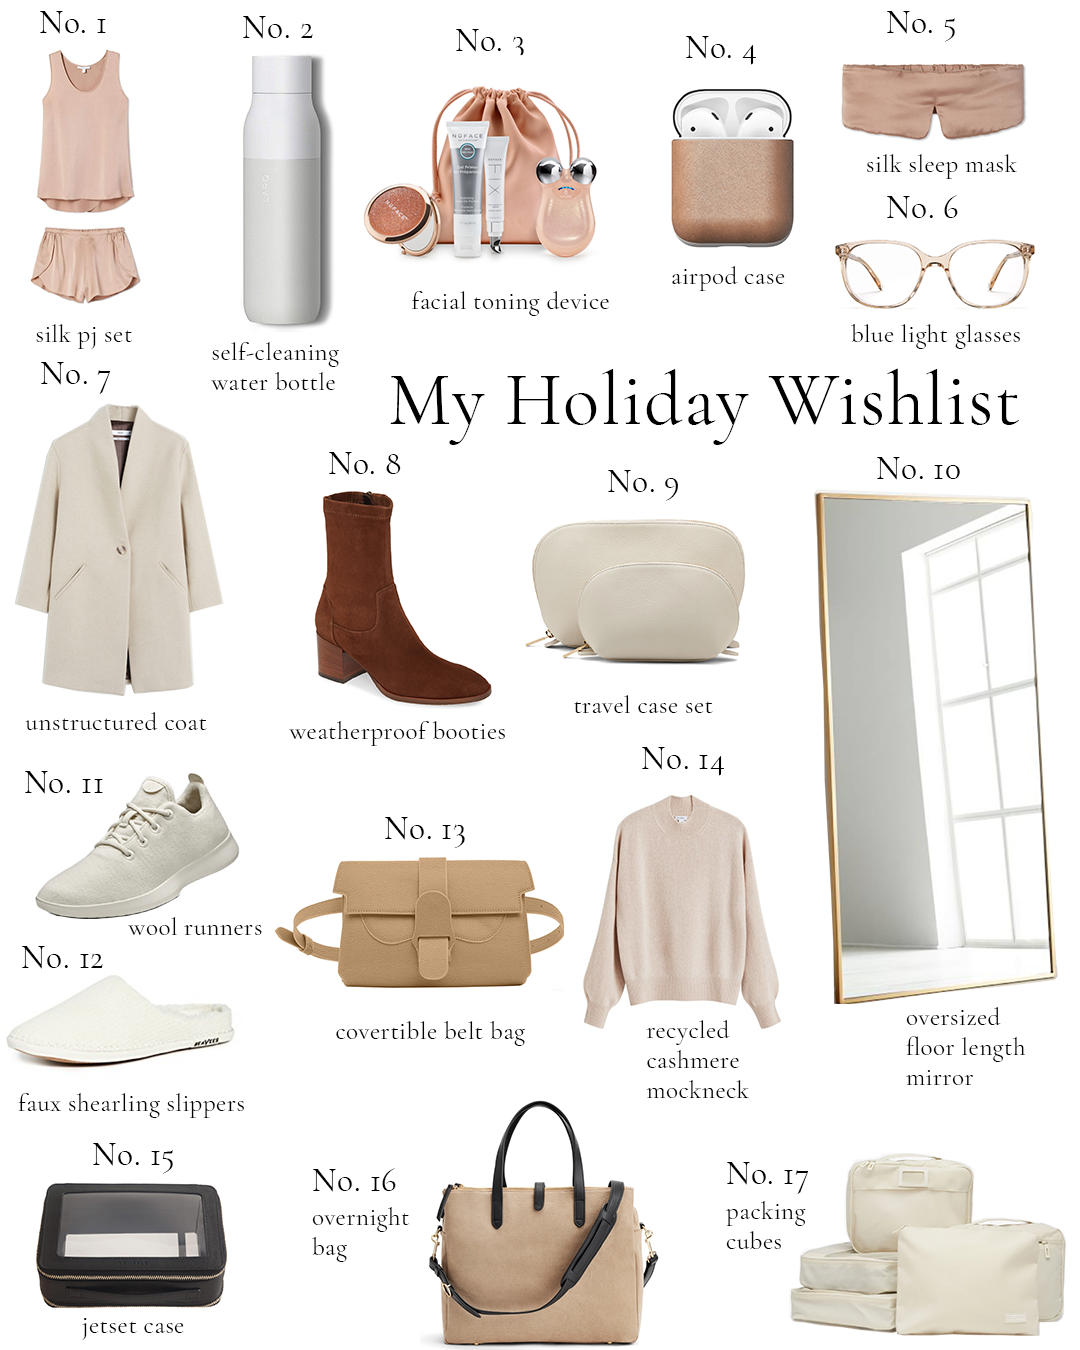 Best things to put on your wishlist